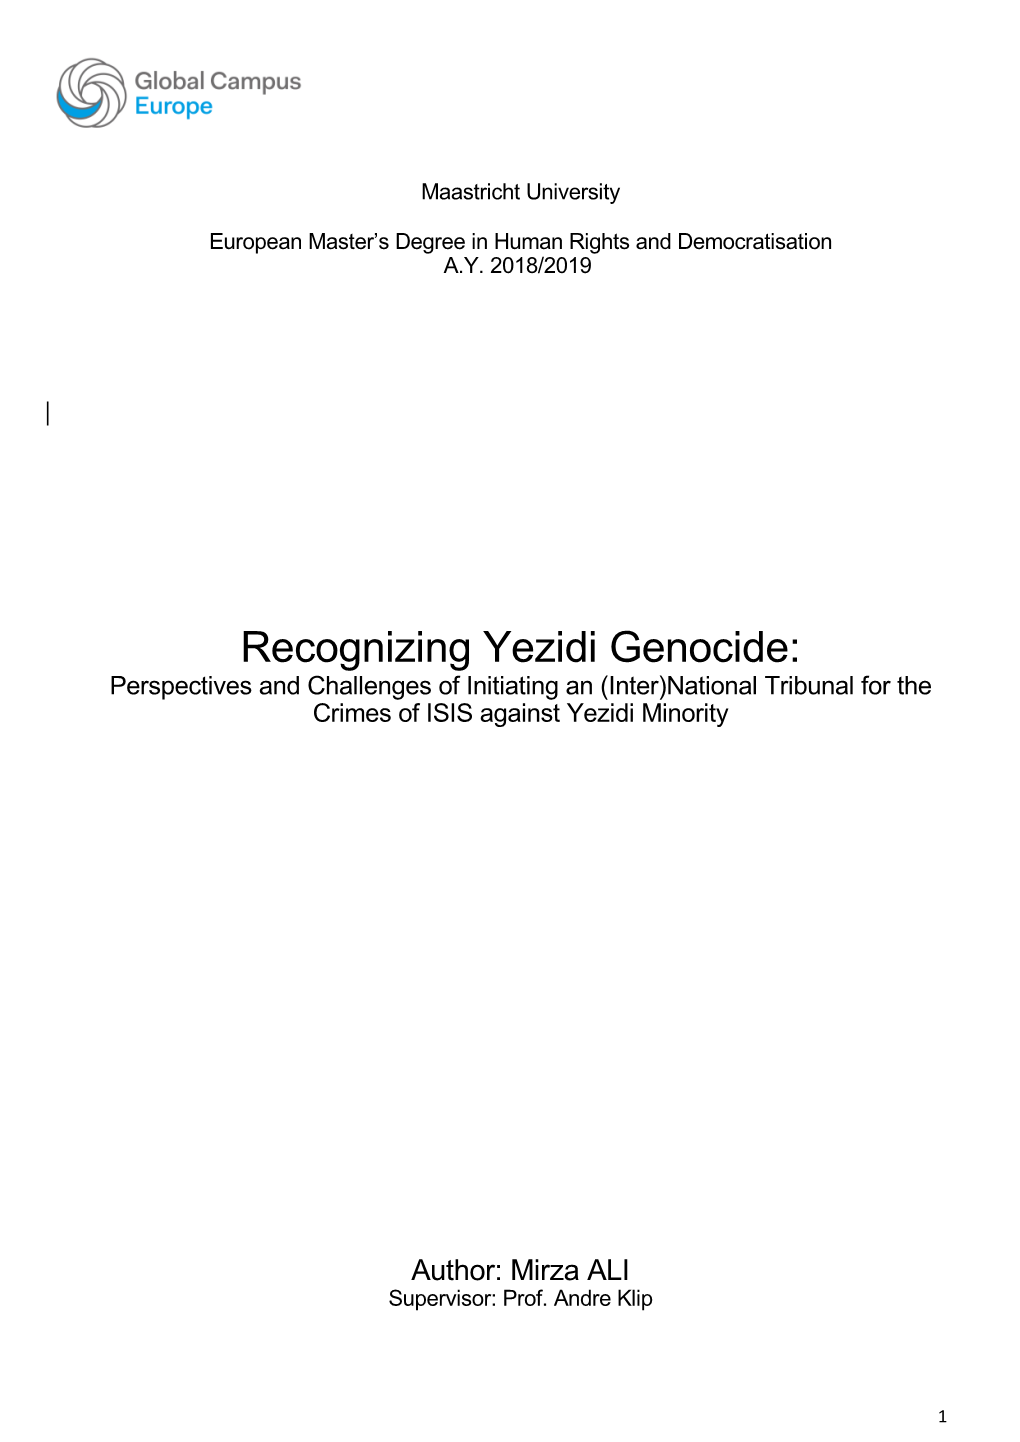 Recognizing Yezidi Genocide: Perspectives and Challenges of Initiating an (Inter)National Tribunal for the Crimes of ISIS Against Yezidi Minority